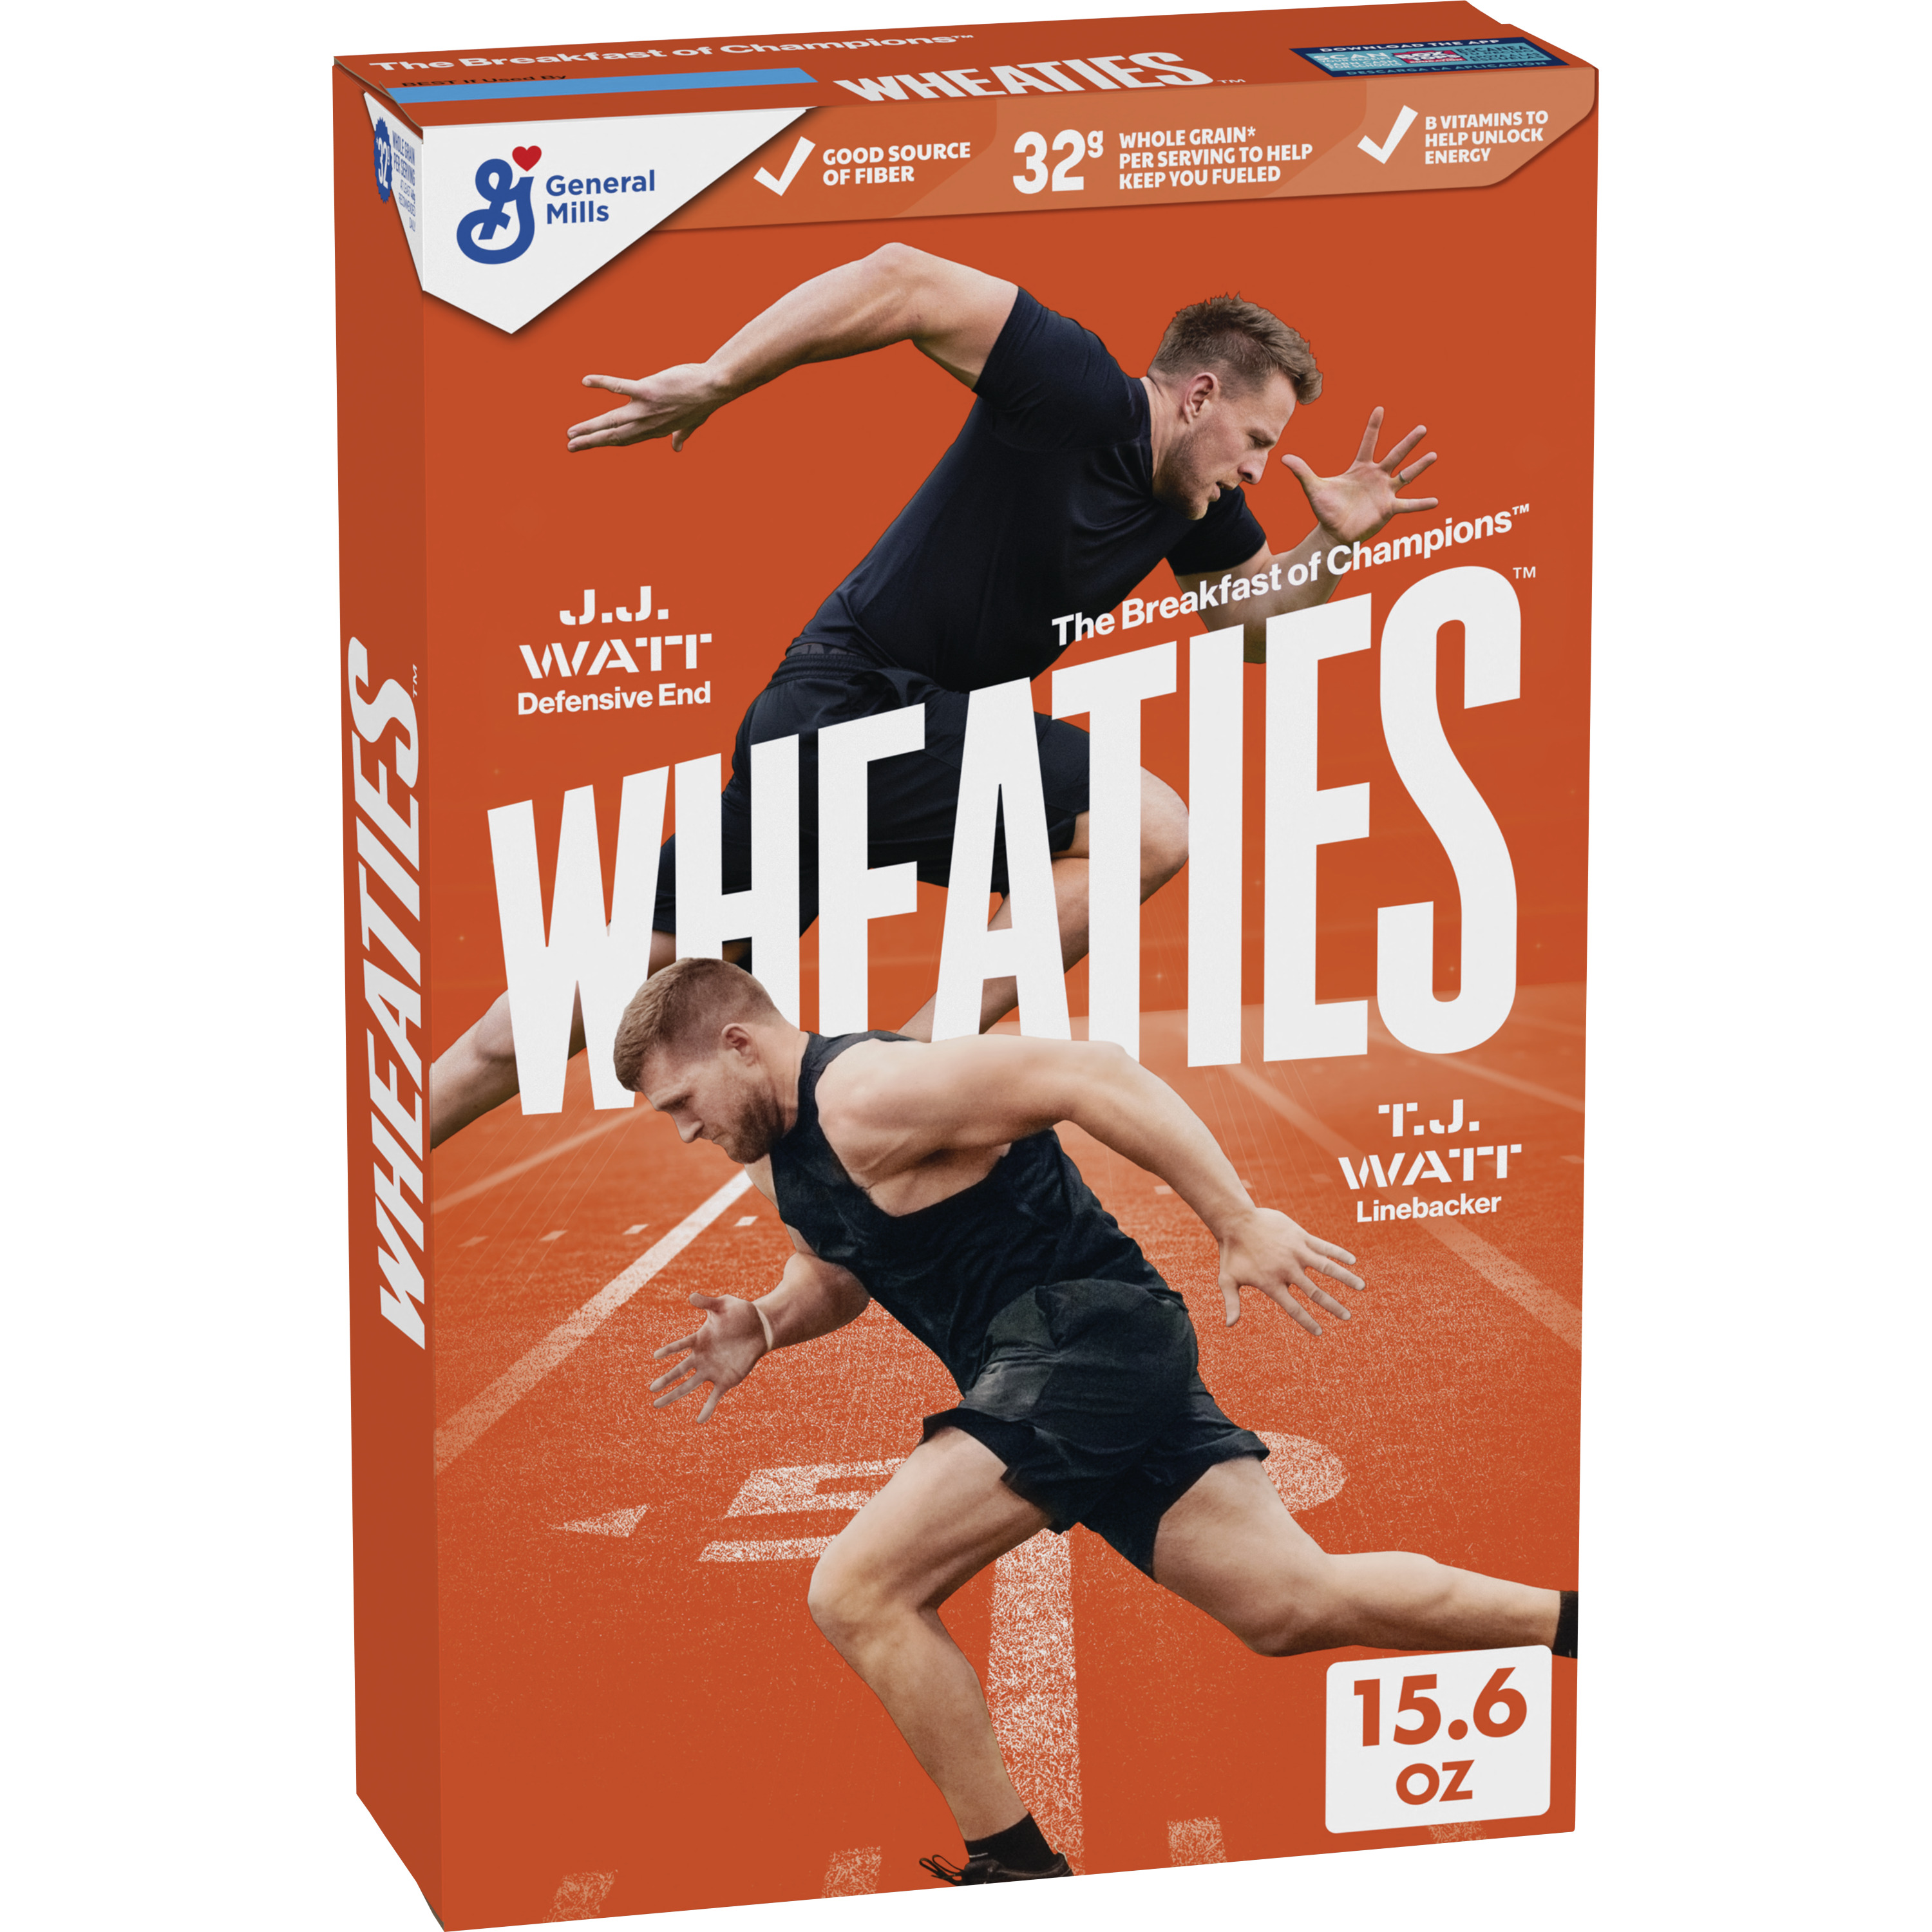 Wheaties Breakfast Cereal, Breakfast of Champions, 100% Whole Wheat Flakes, 15.6 oz - image 1 of 10